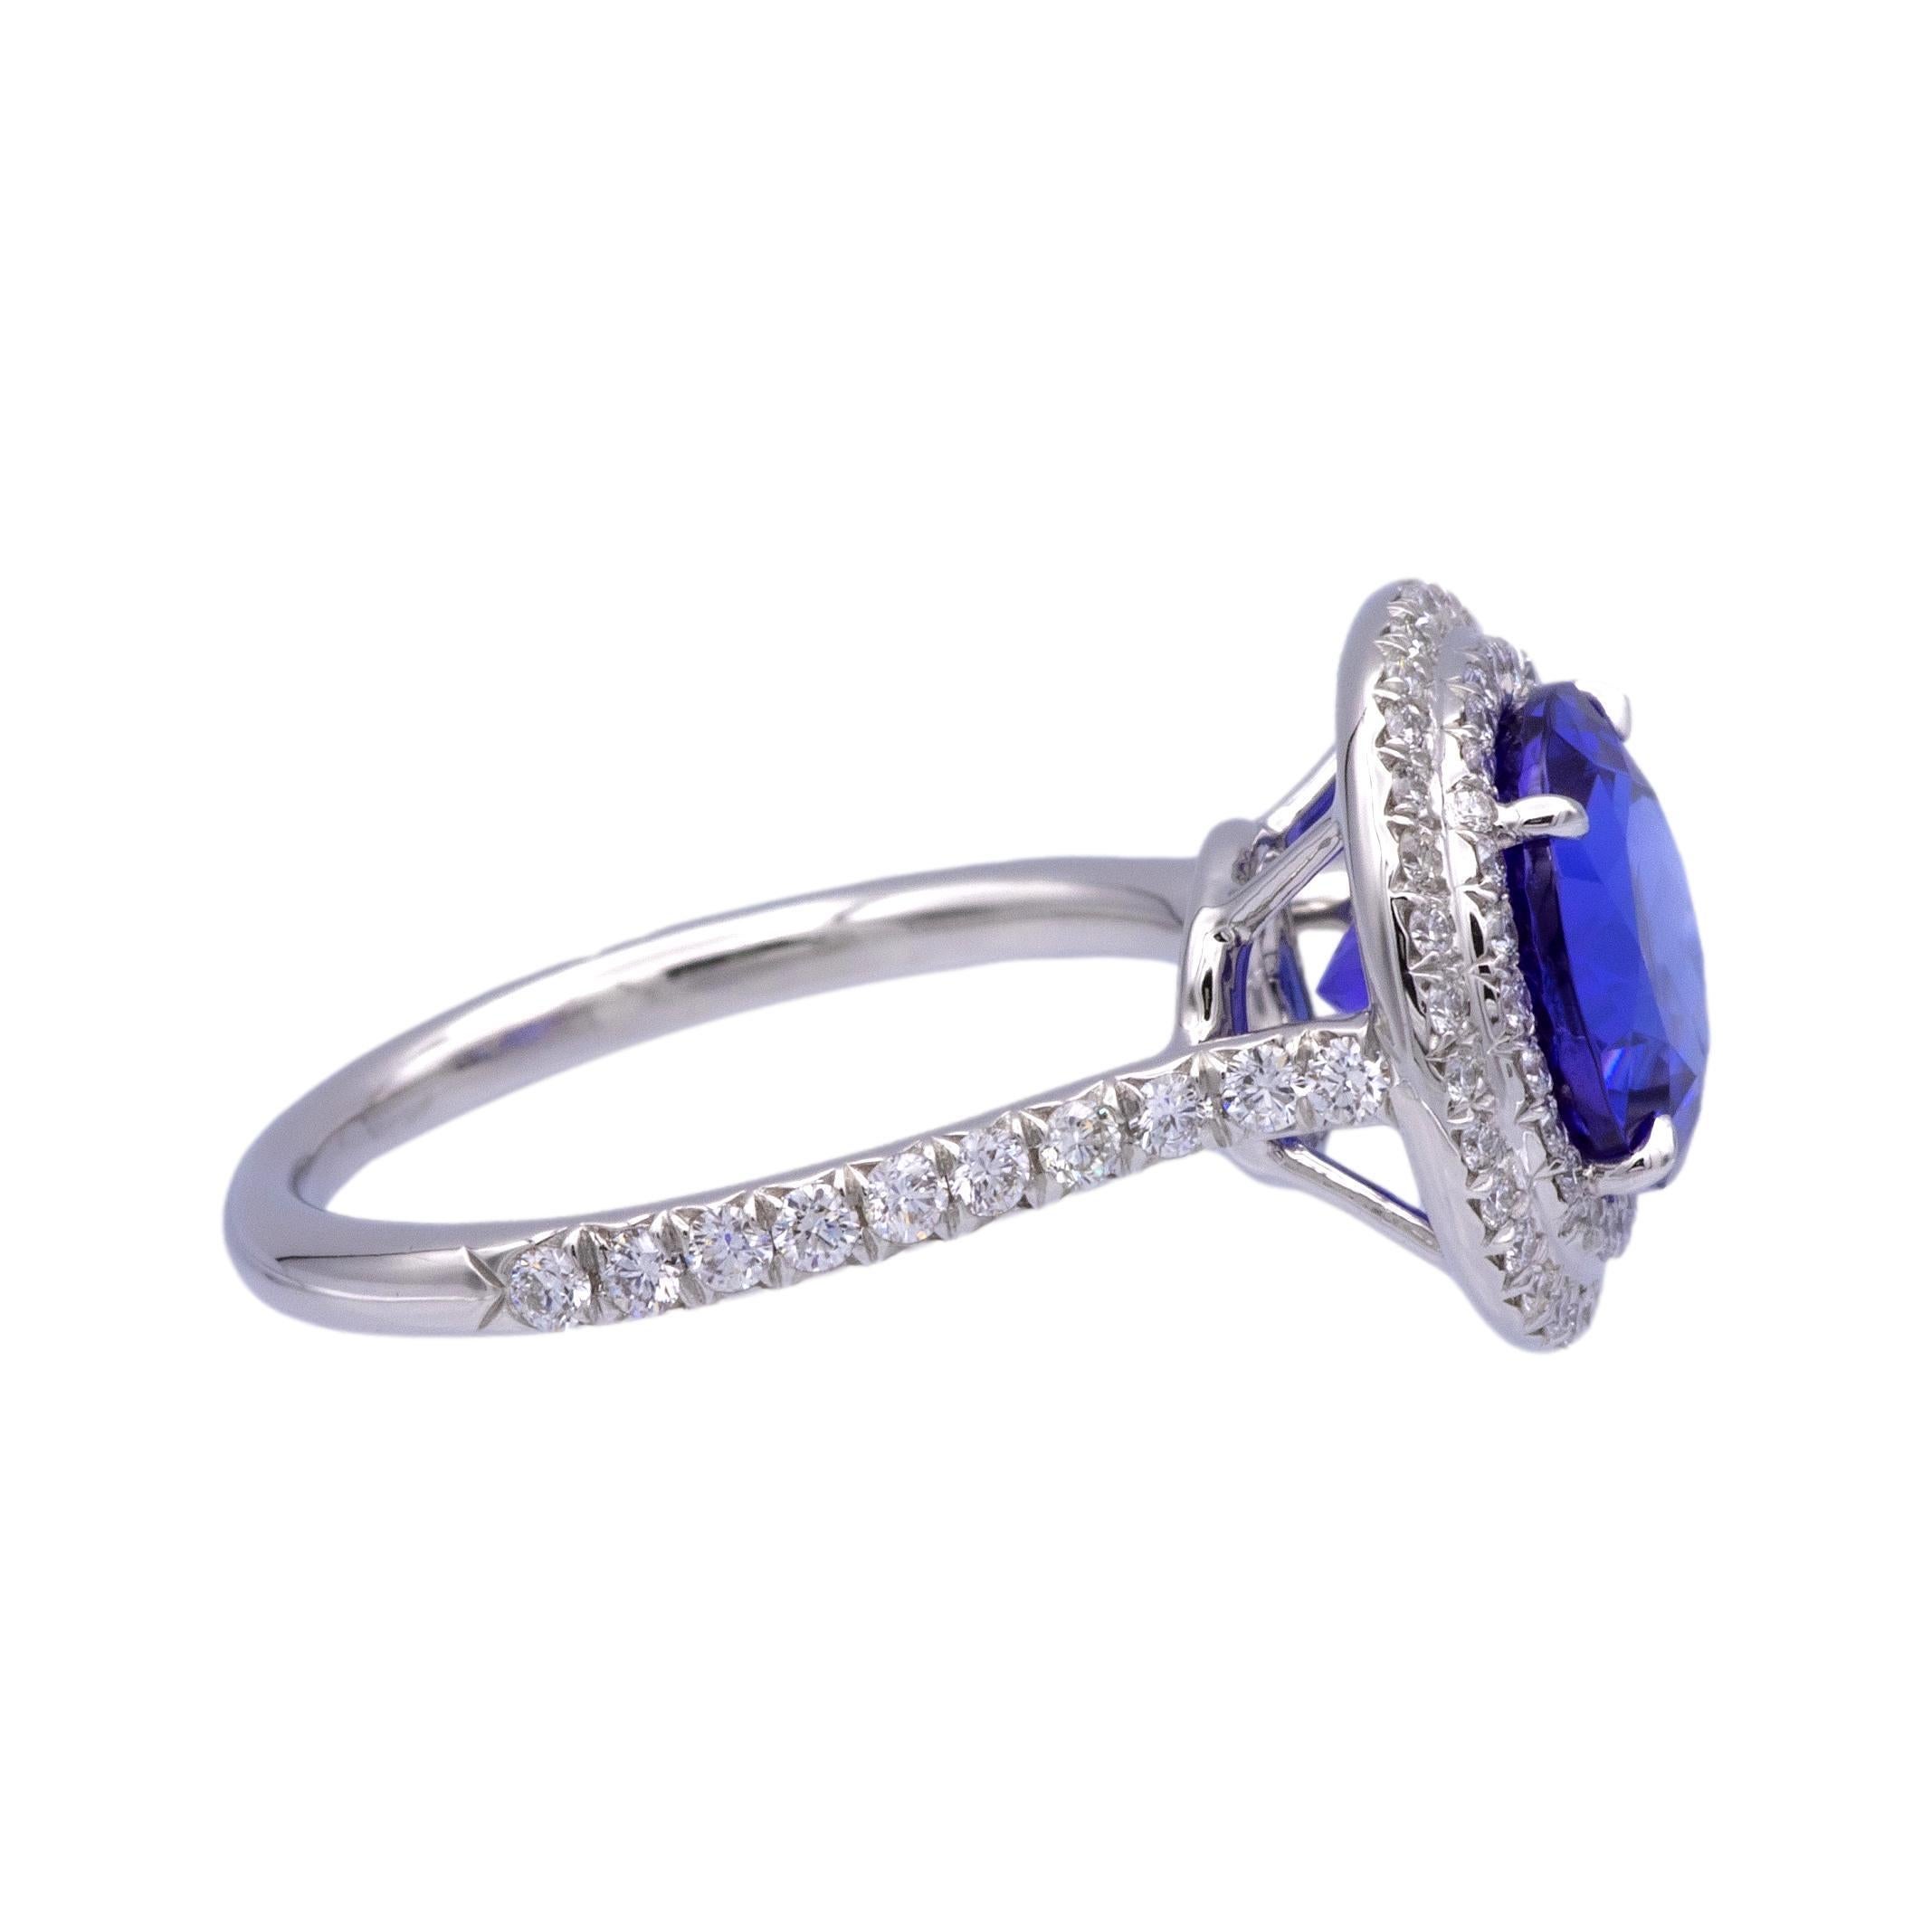 Tiffany & Co. Platinum Double Soleste Round Shape 3ct Tanzanite Diamond Ring In Excellent Condition For Sale In New York, NY